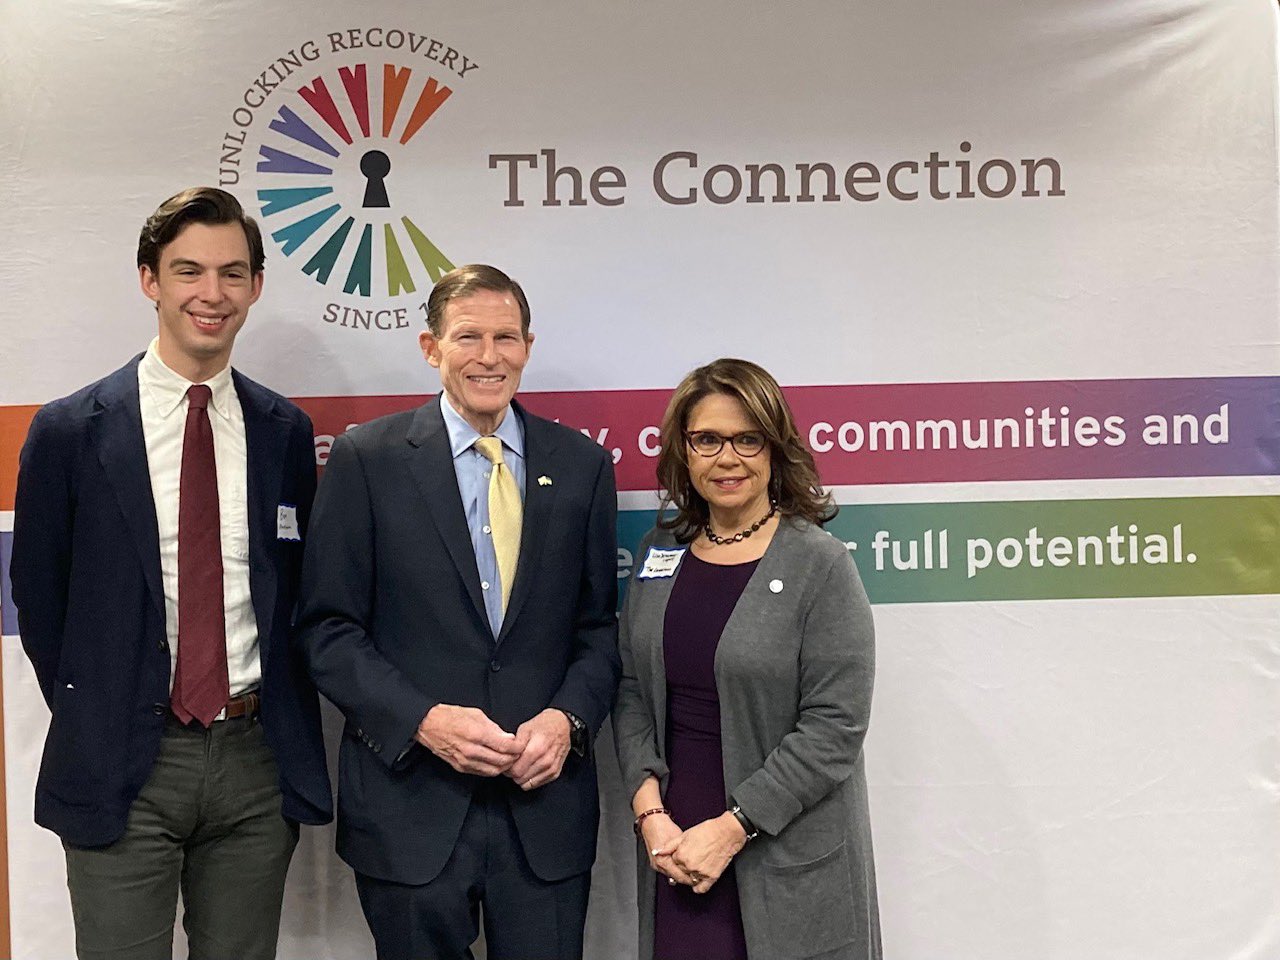 Blumenthal announced two federal grants totaling $243,000 for The Connection, a statewide nonprofit organization providing mental health services and substance use prevention and treatment for adults and youth. 